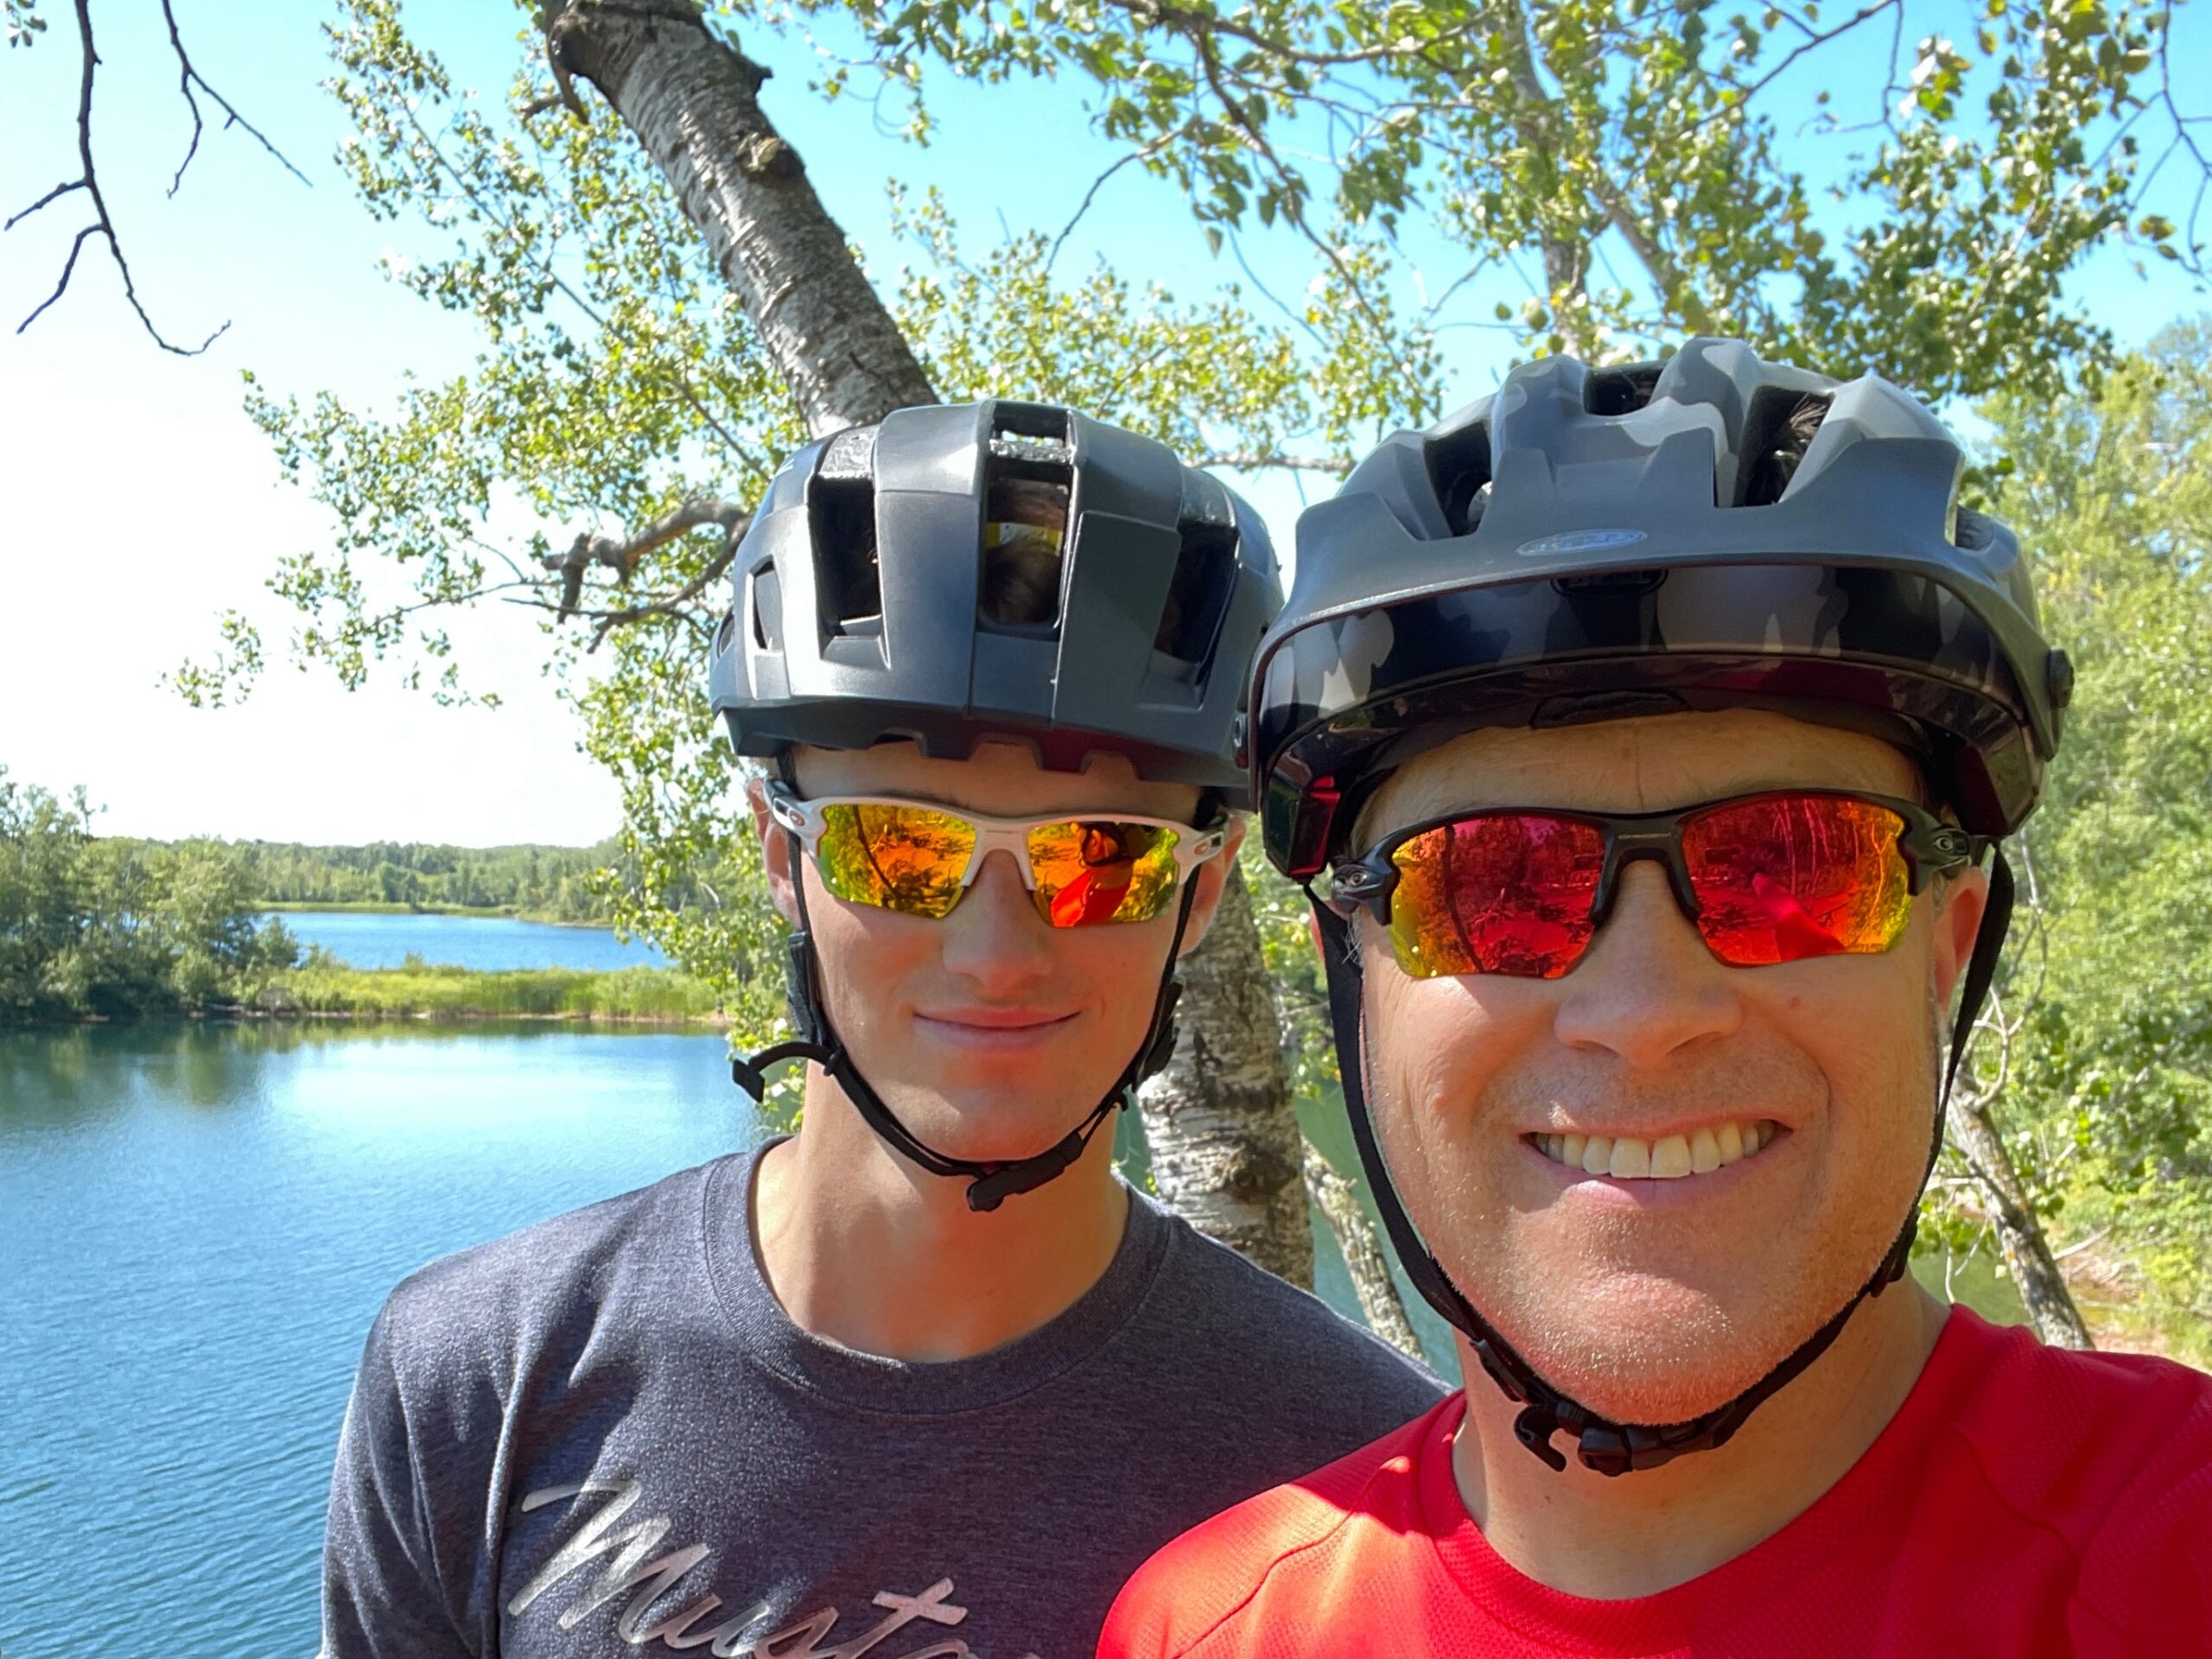 Matt Bischel and his son smiling in front of a lake and birch trees with bike helmets on their heads